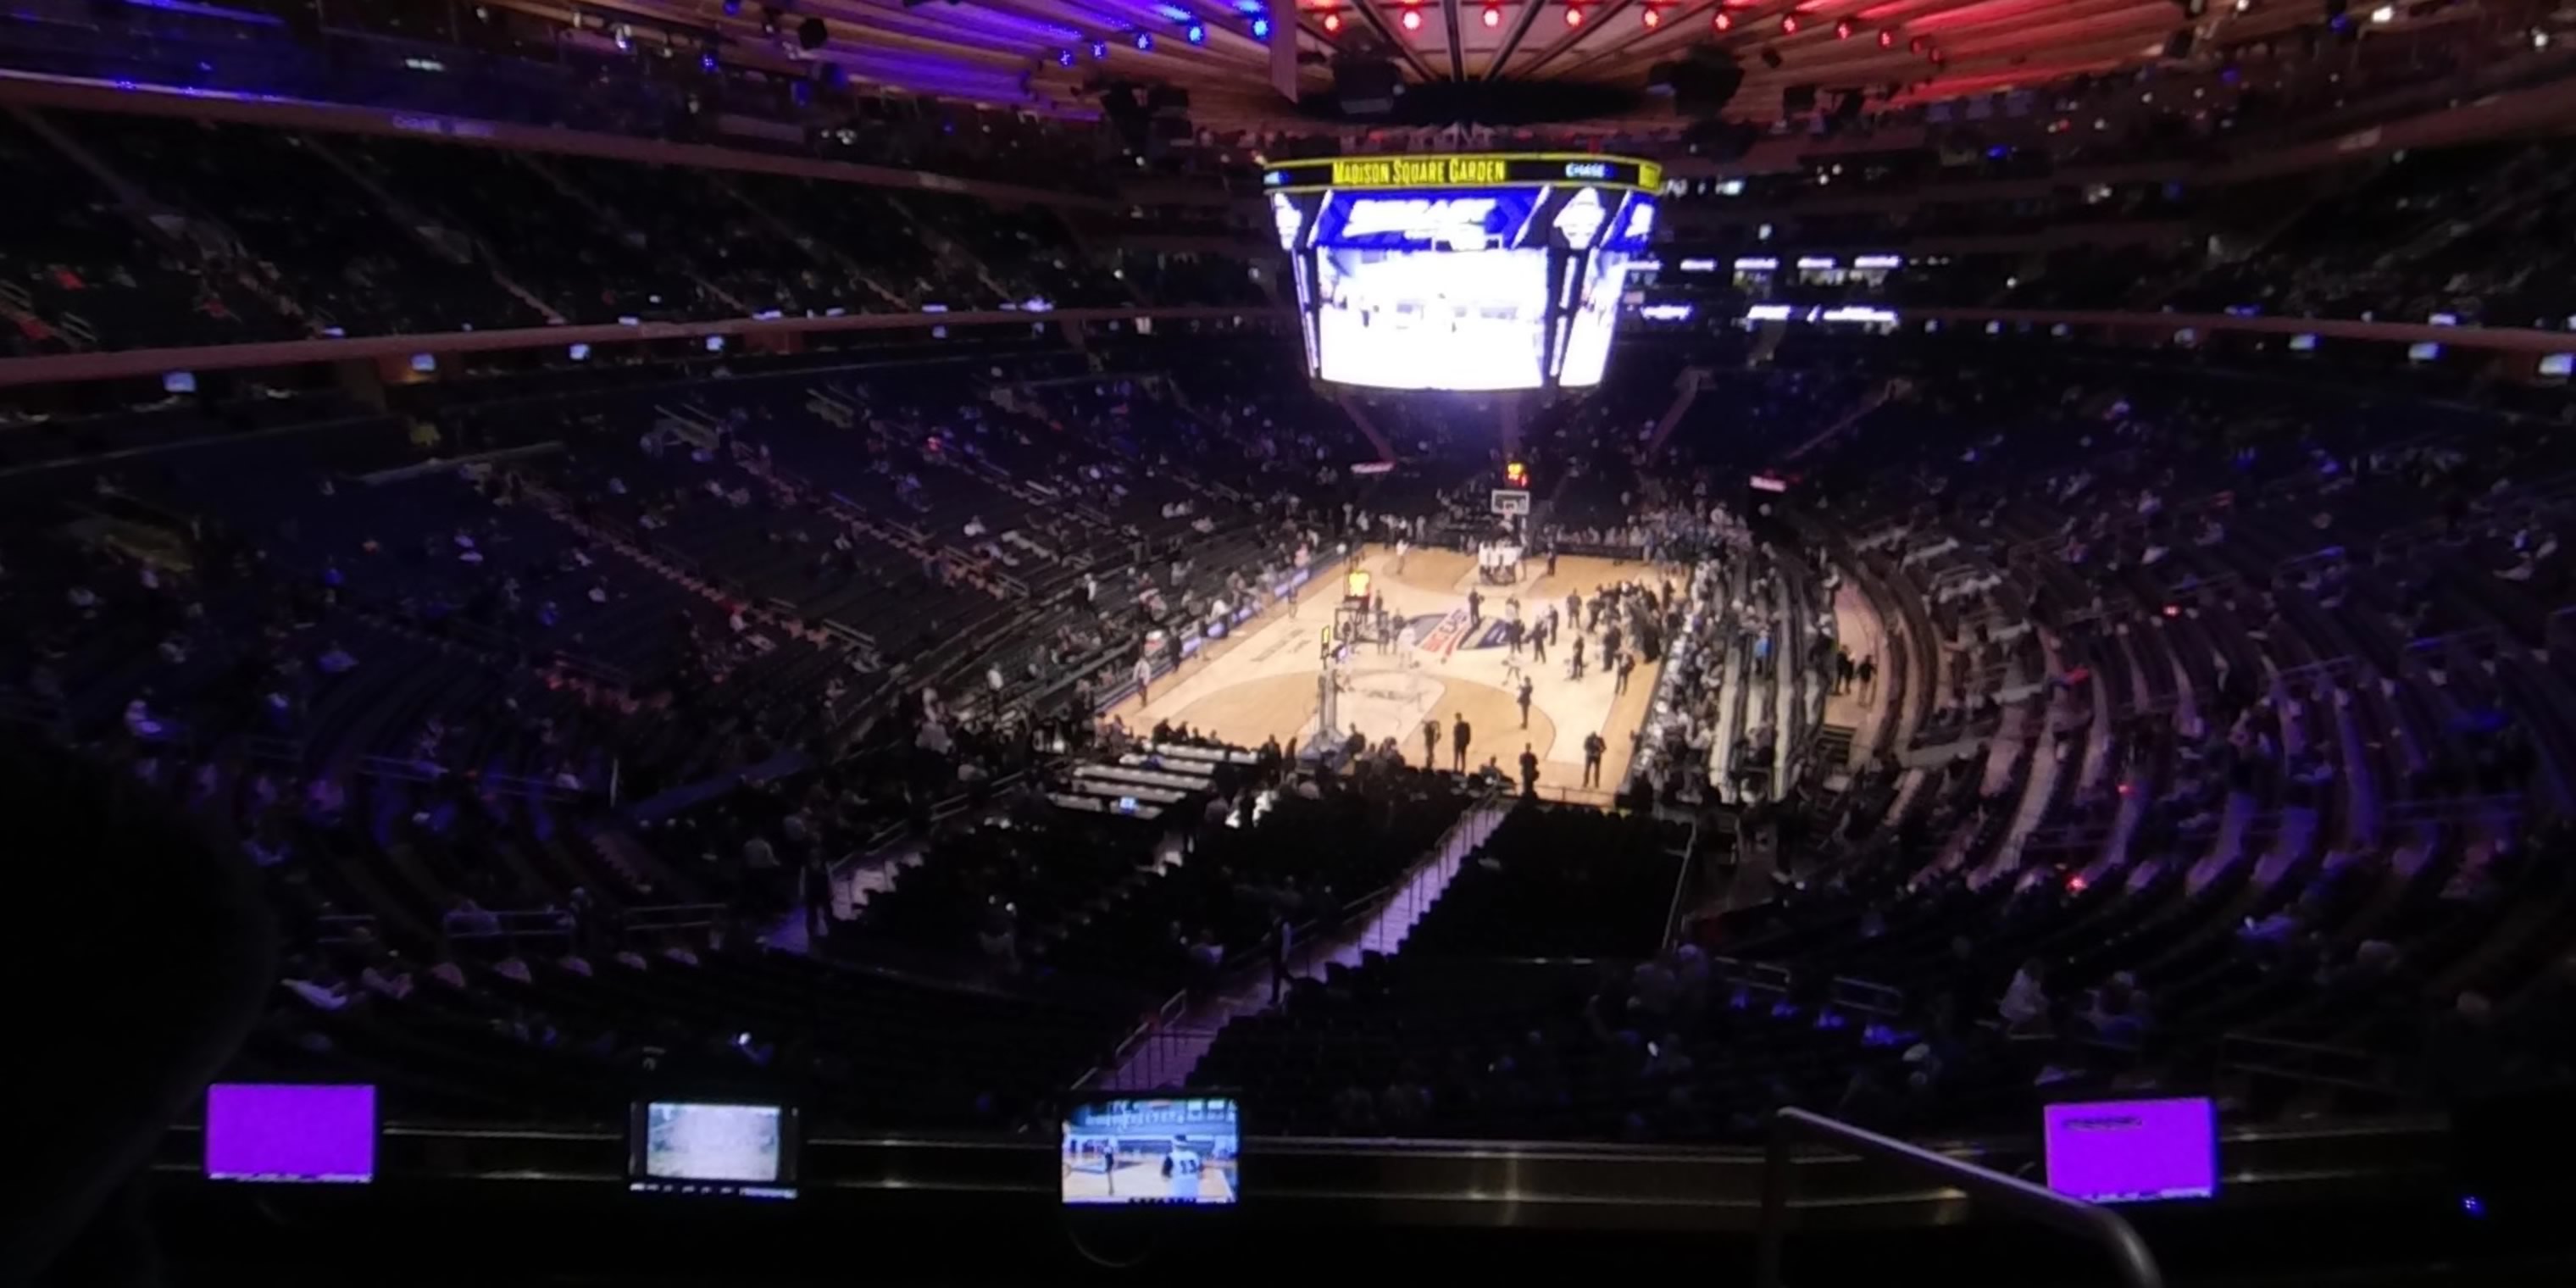 section 218 panoramic seat view  for basketball - madison square garden